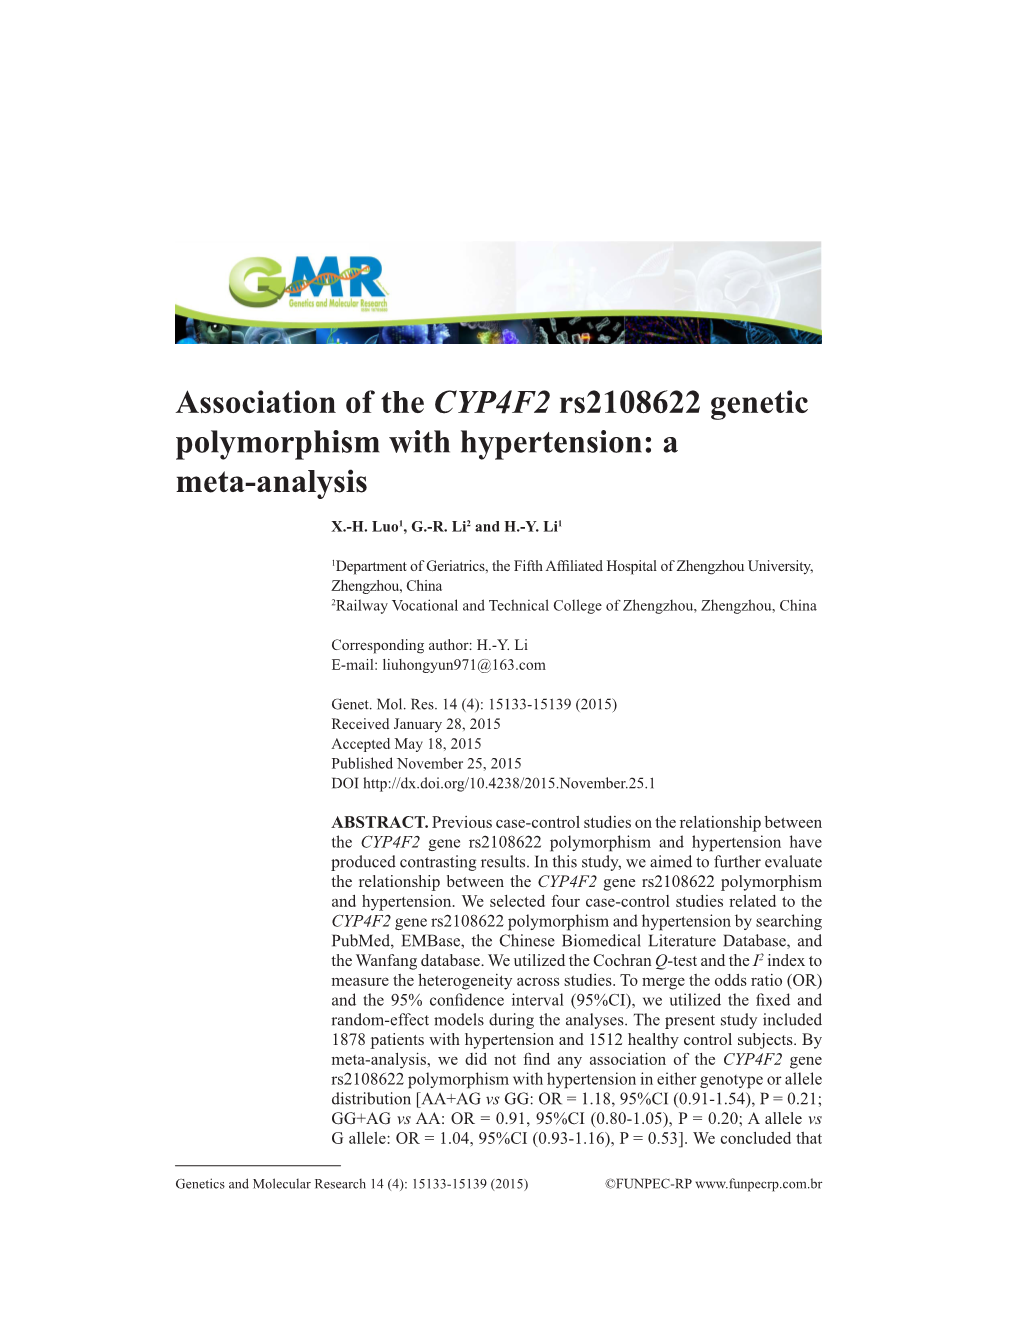 Association of the CYP4F2 Rs2108622 Genetic Polymorphism with Hypertension: a Meta-Analysis